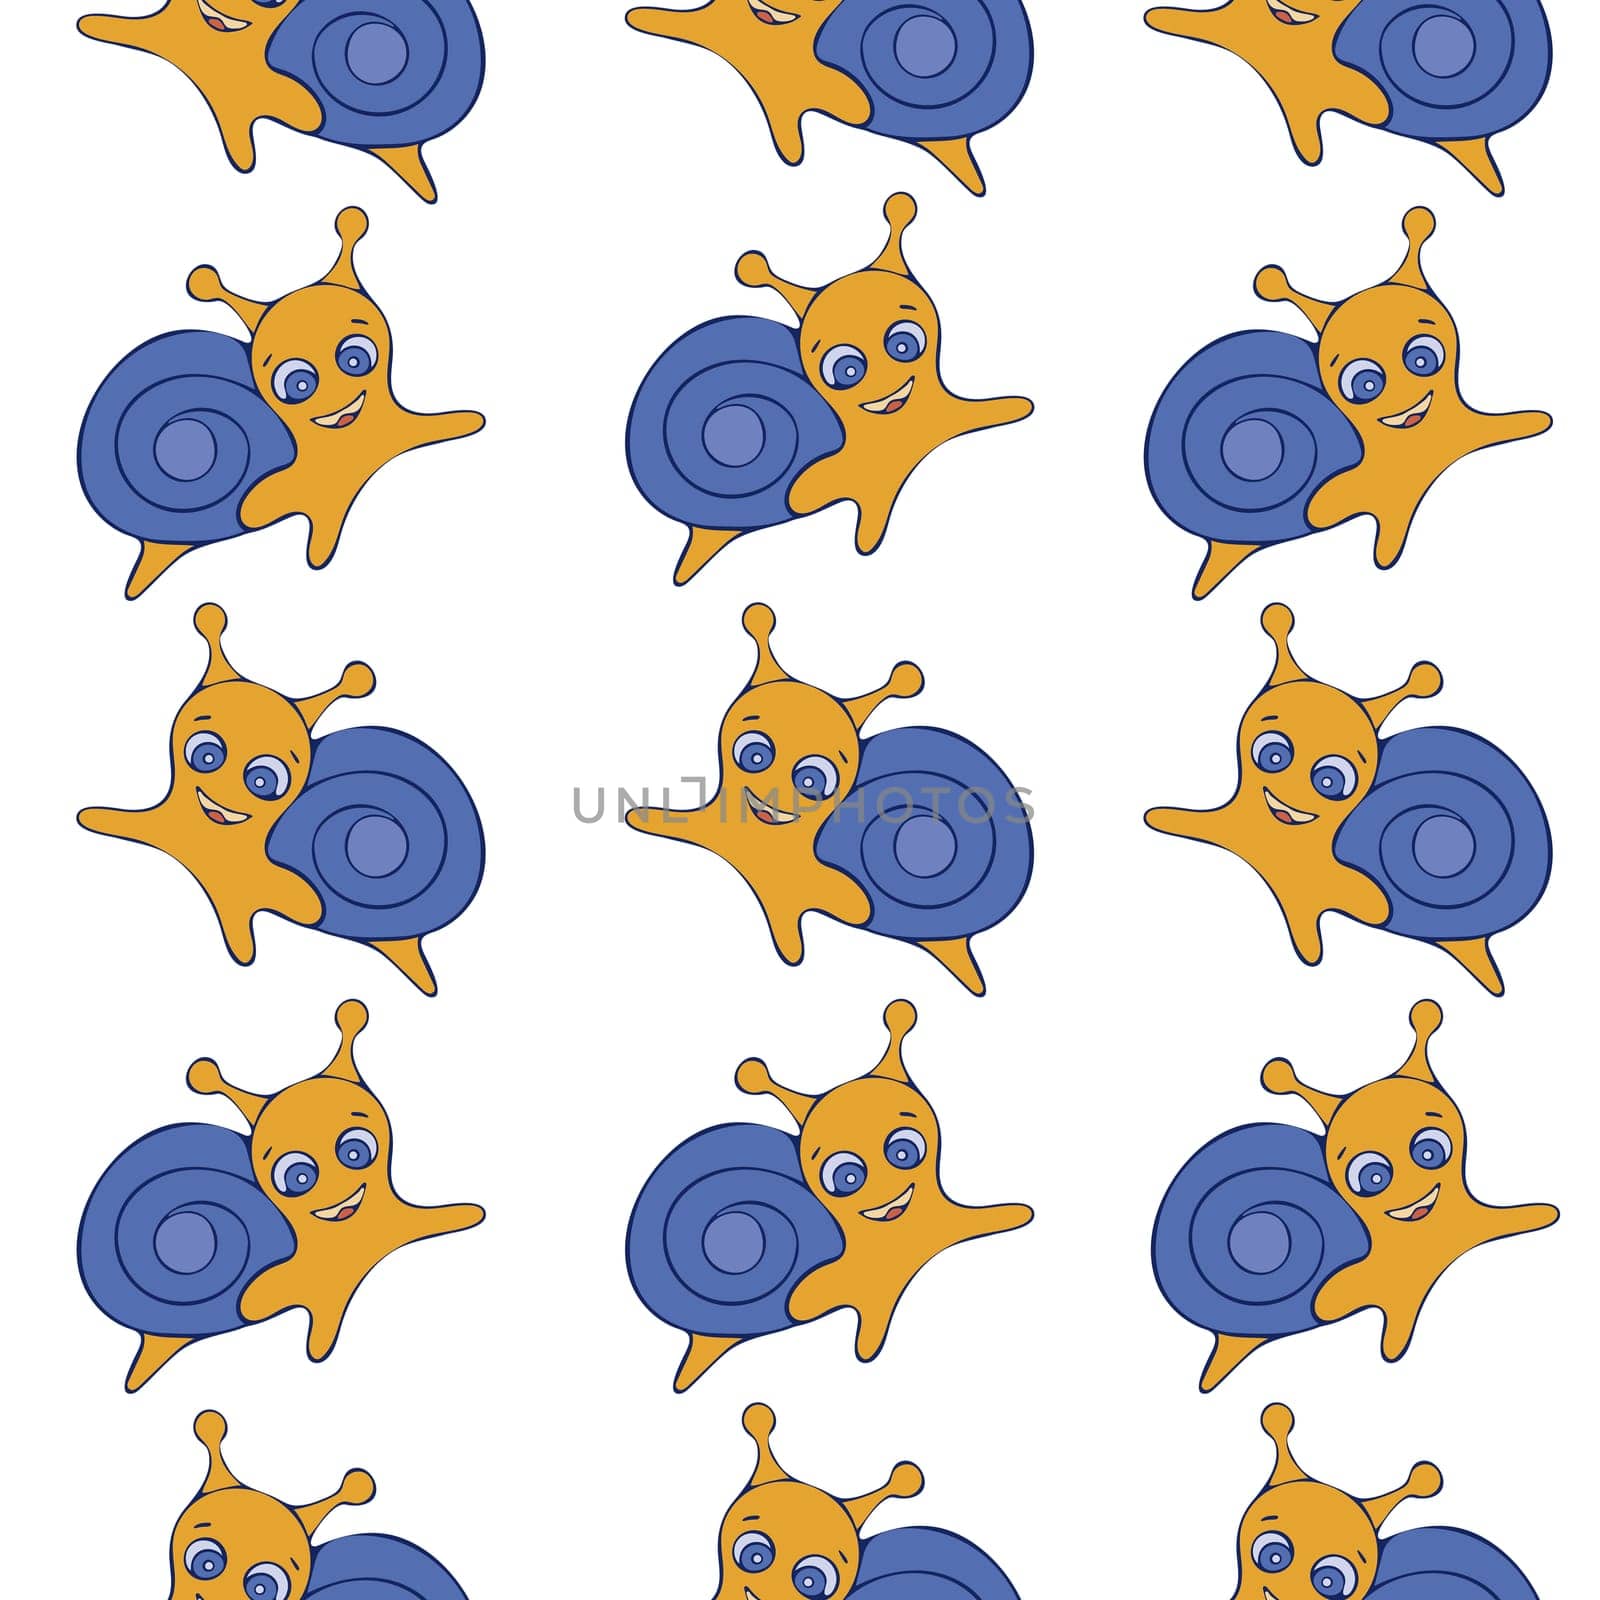 Cute Snail Seamless Pattern. Hand Drawn Digital Paper with Colorful Snail Illustration. Wallpaper with Cute Blue and Orange Snail on White Background.